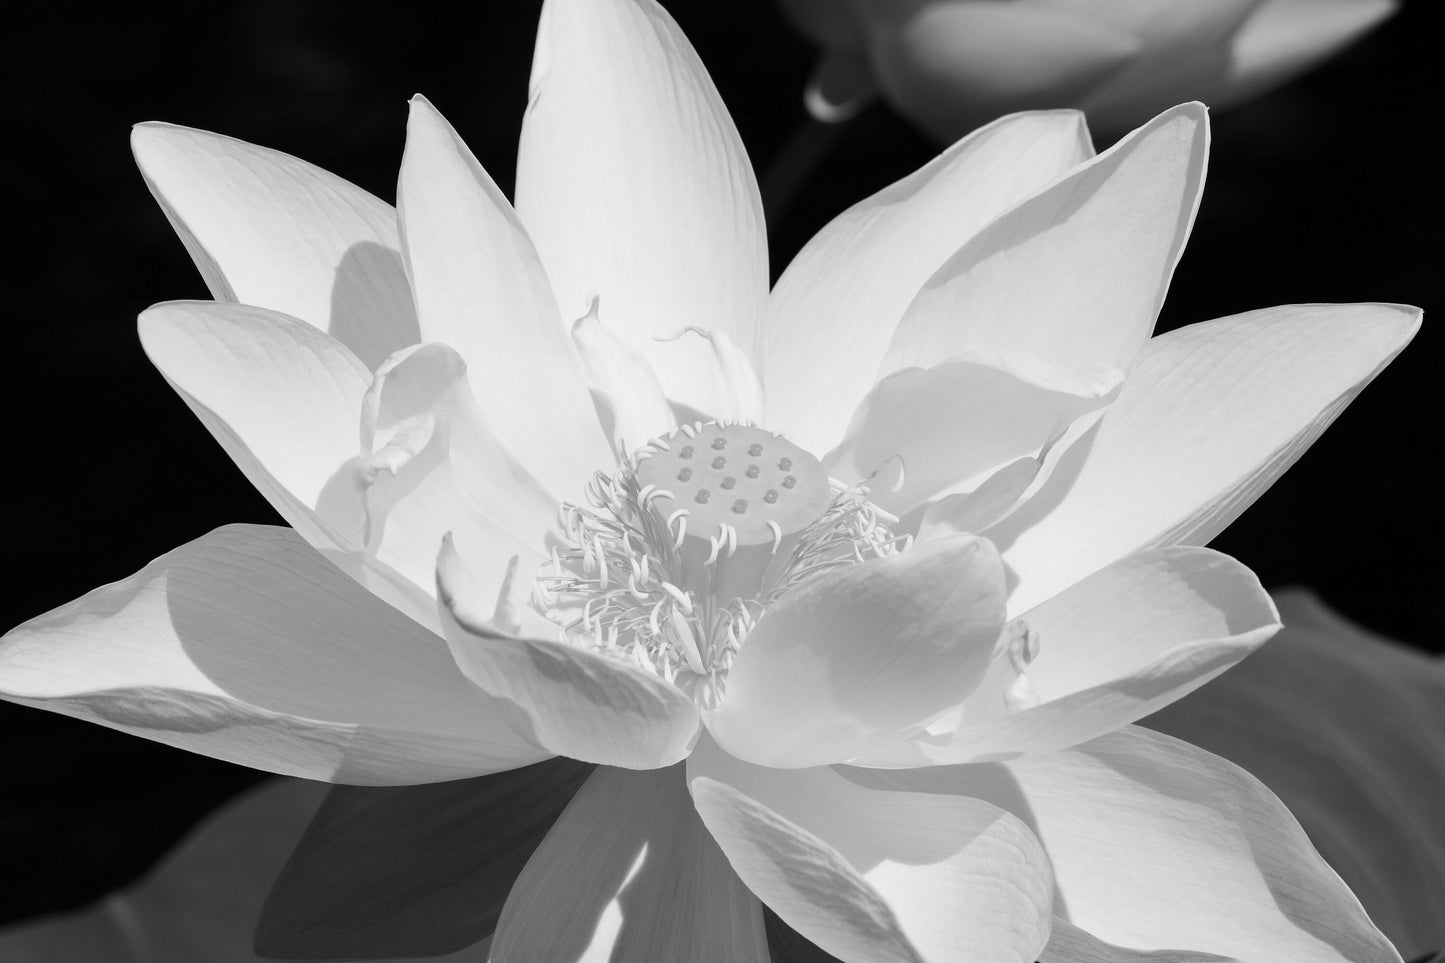 Lotus print, Giant Lotus flower photo, black and white photography, B&W wall art, floral decor, paper or canvas picture, 5x7 8x10 to 40x60"